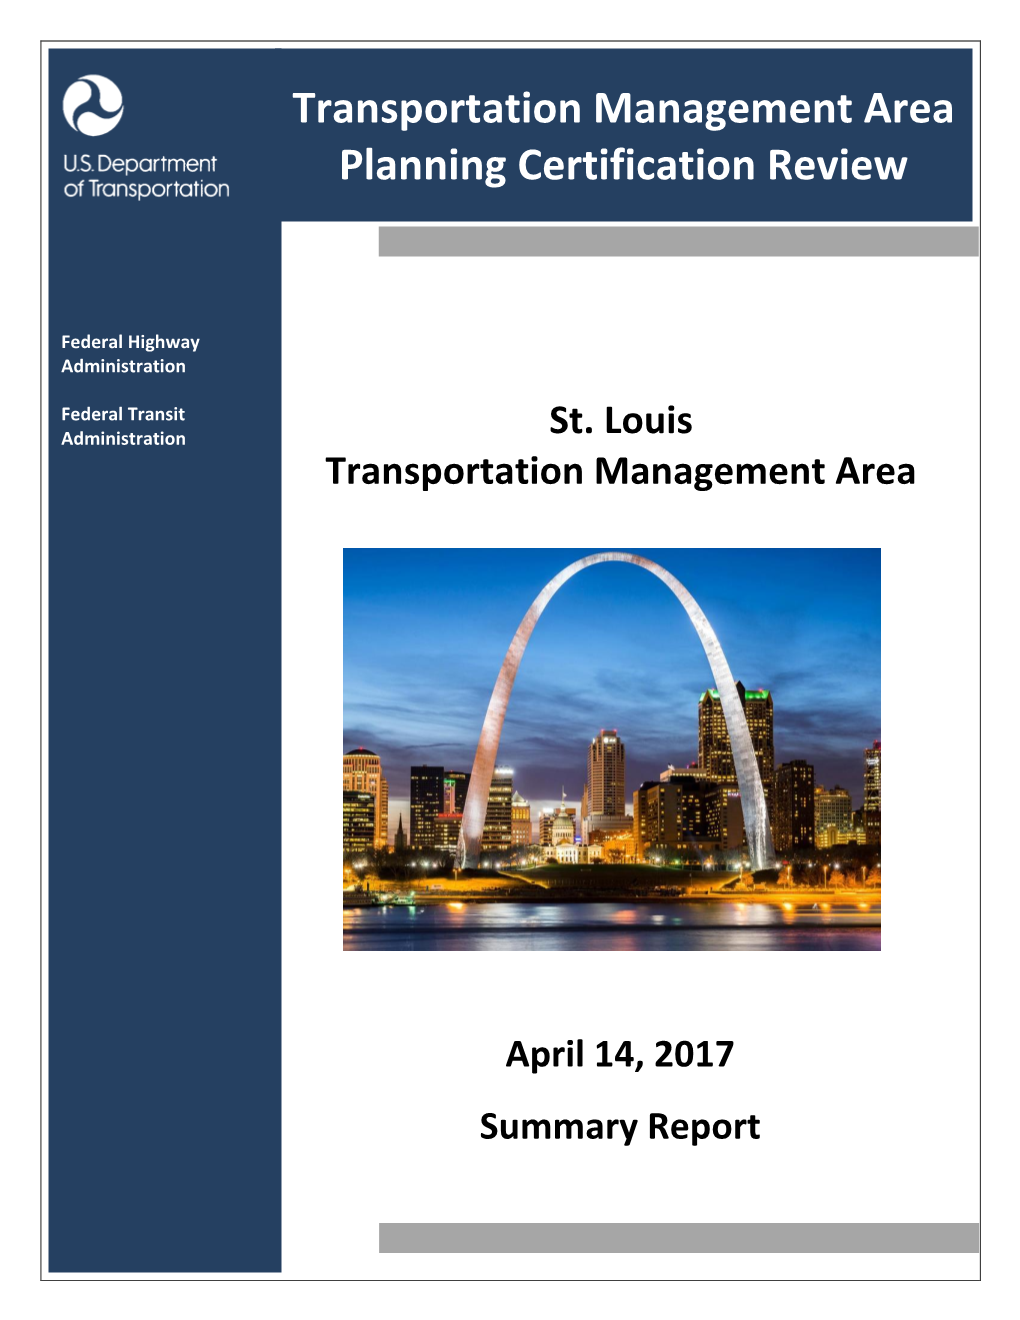 2017 Certification Review Report